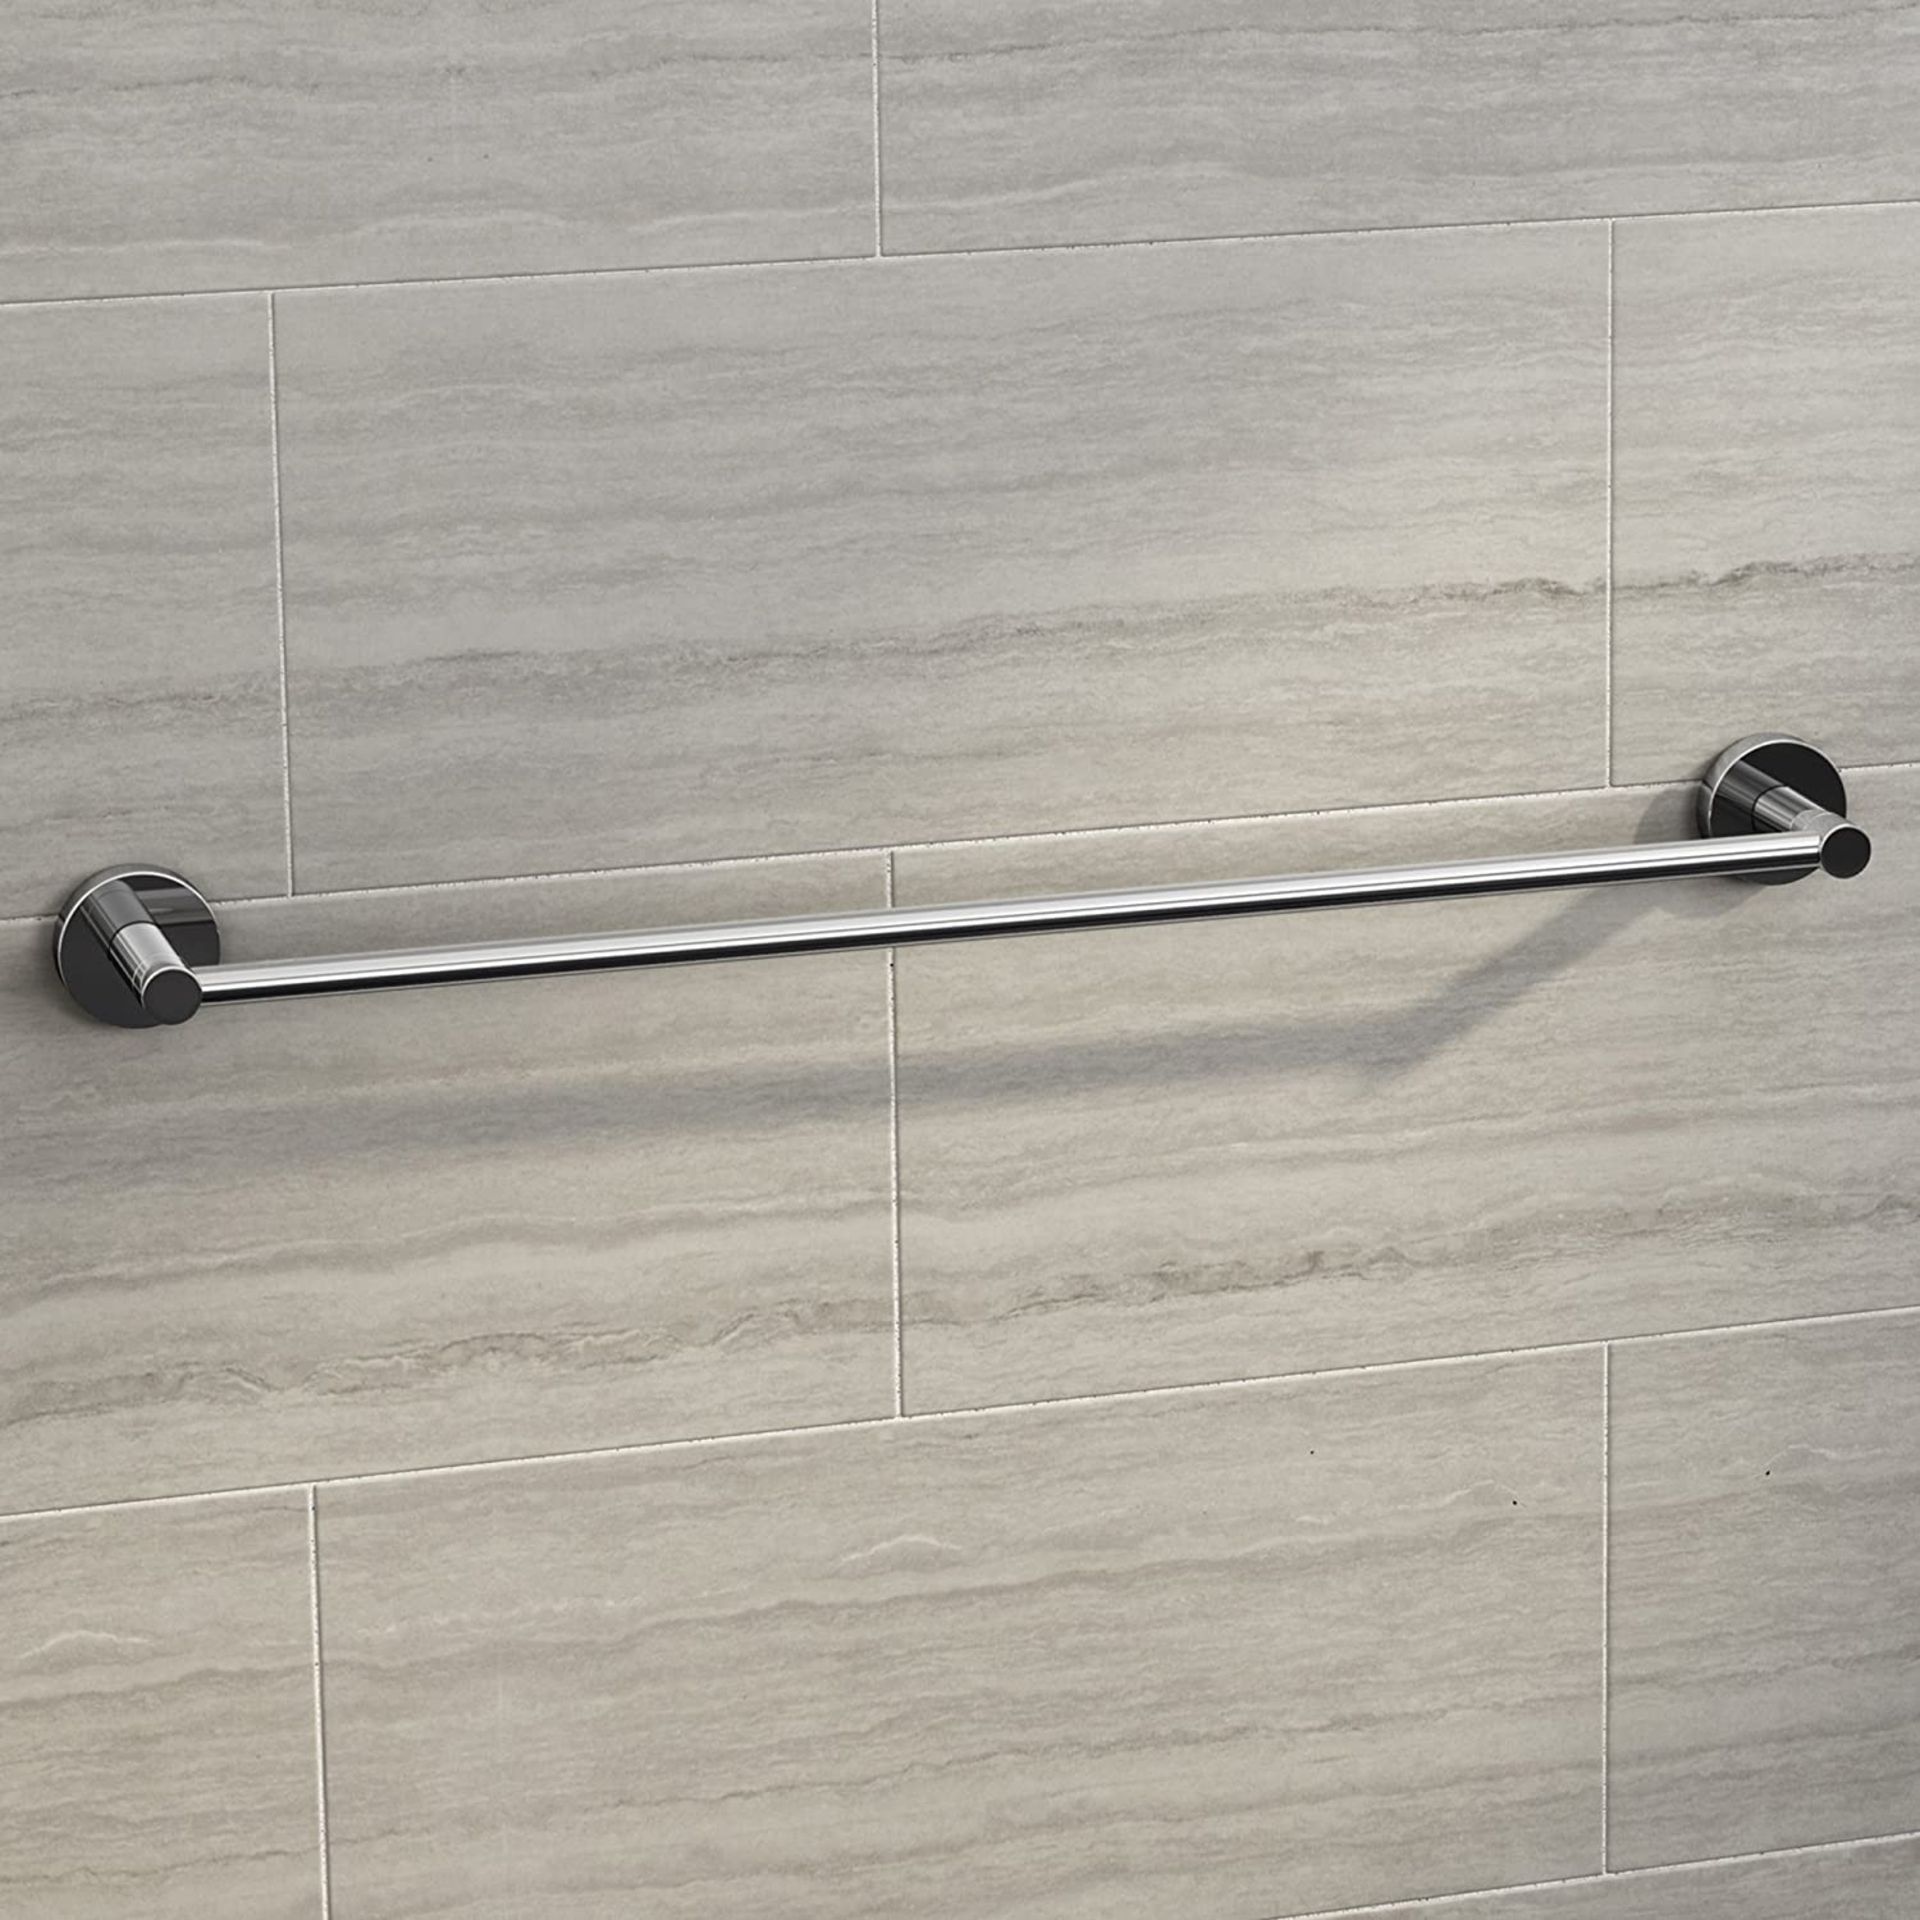 (MG1015) Modern Chrome Towel Rail Bar Wall Mounted Round Bathroom Accessory. Fixtures and Fitti...